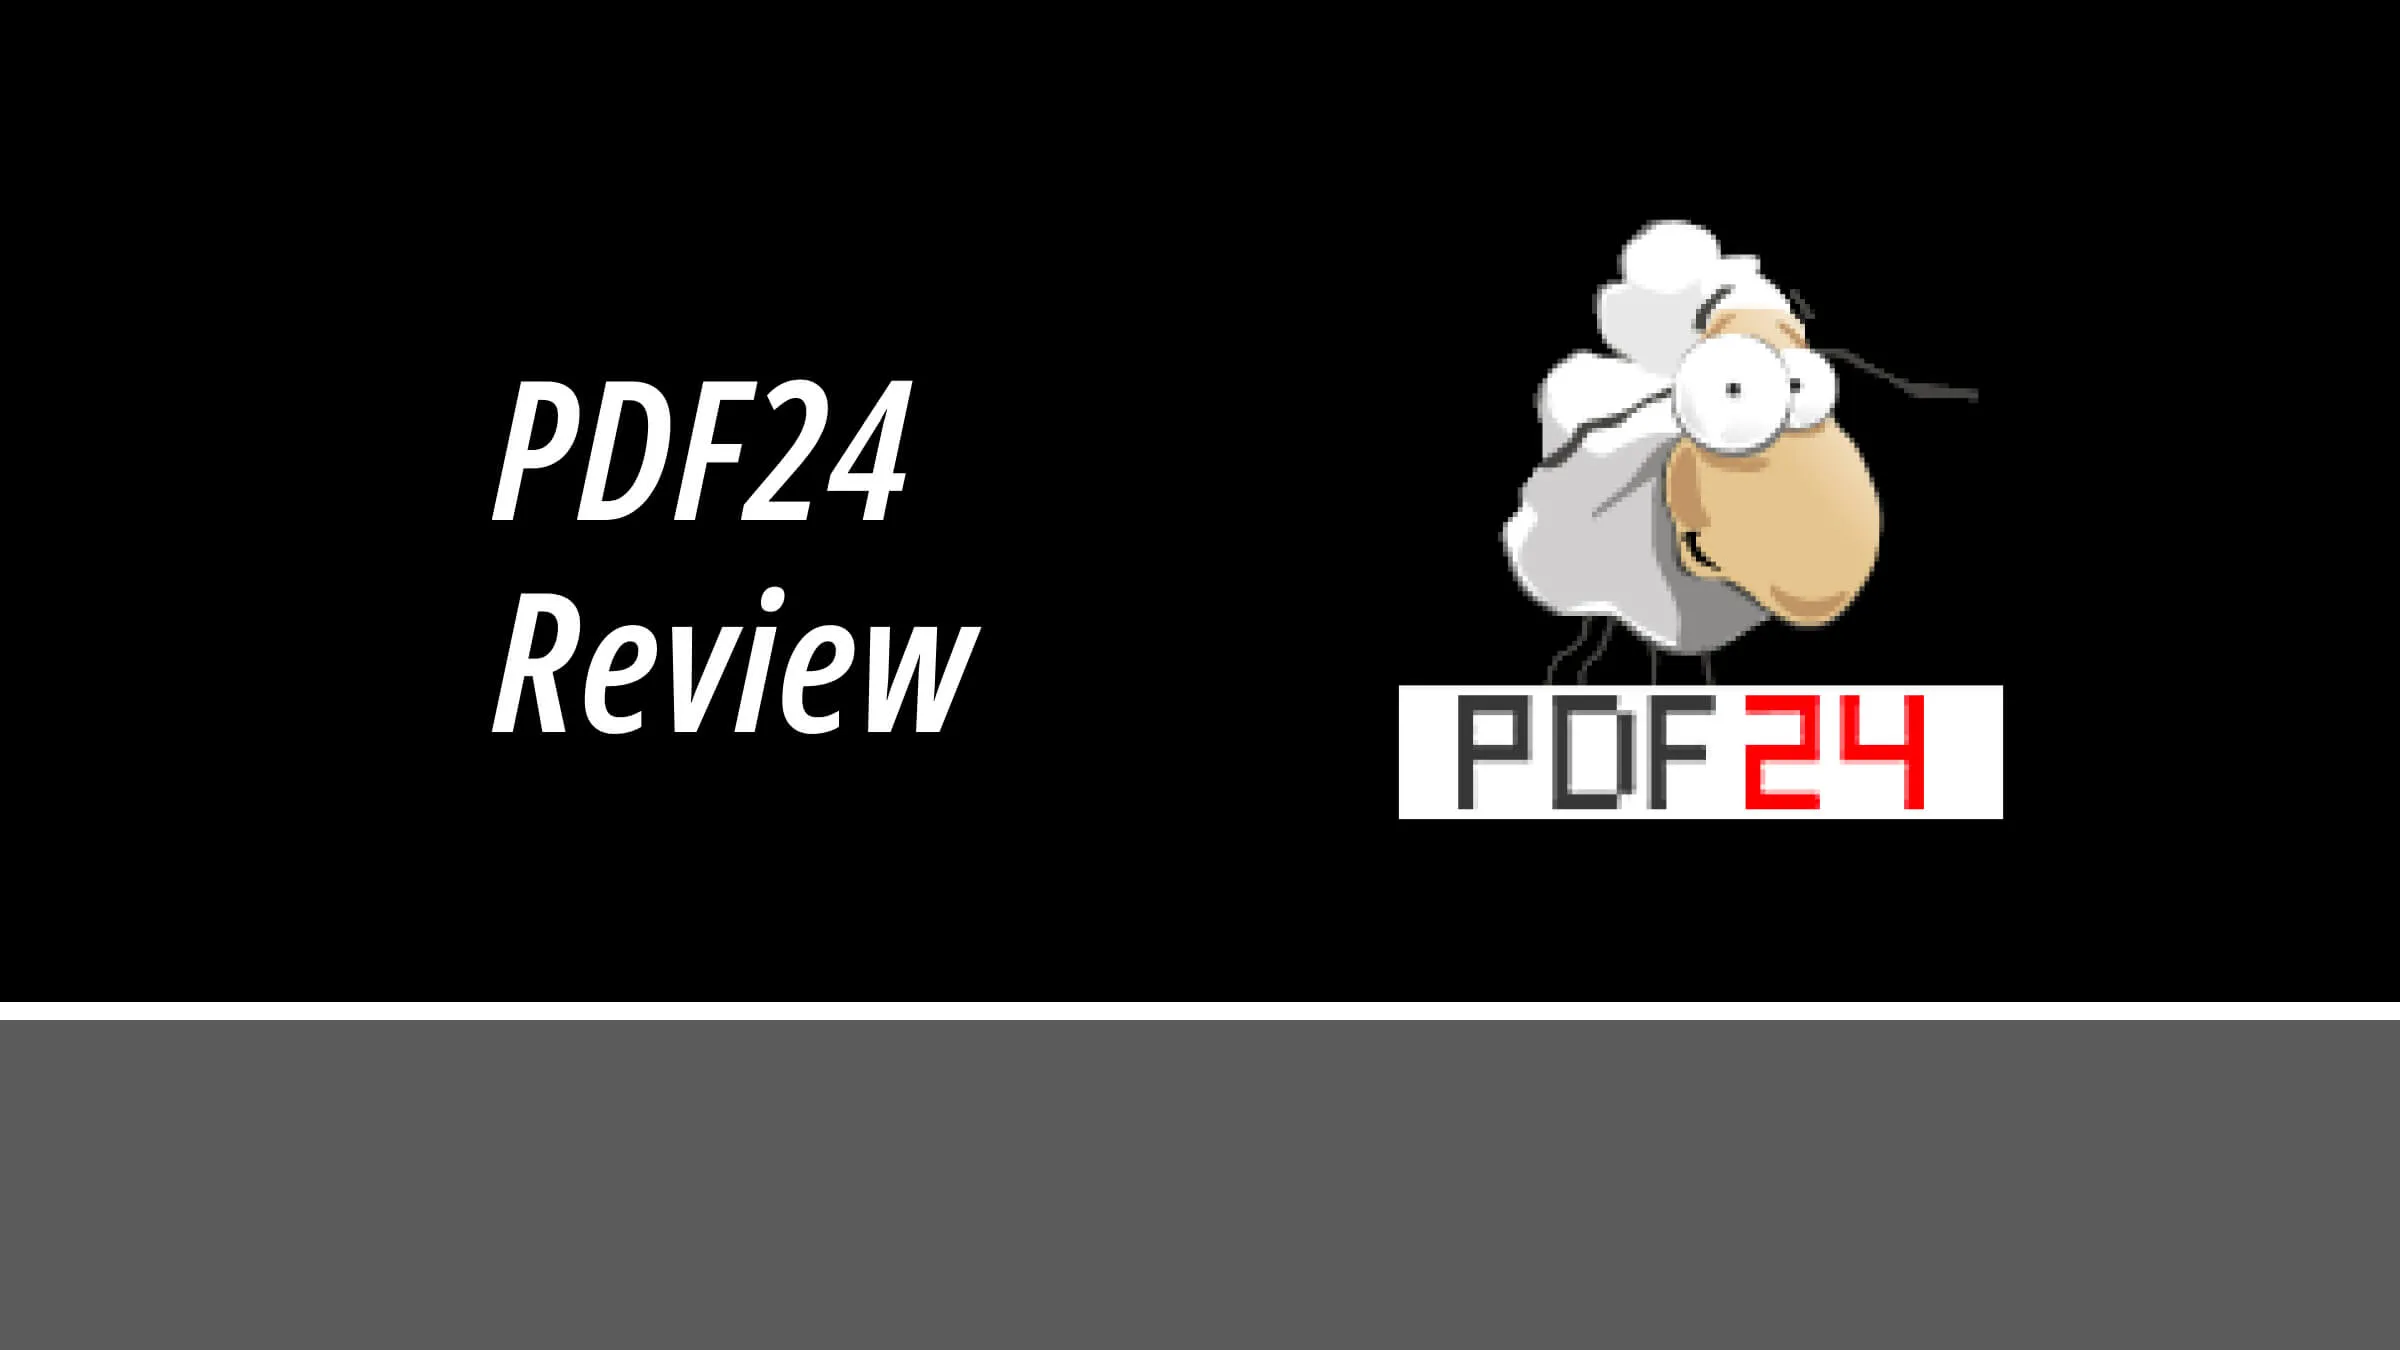 A Full Review of PDF24 Tools and PDF24 Creator - Features, Pricing, Pros, Cons, Everything